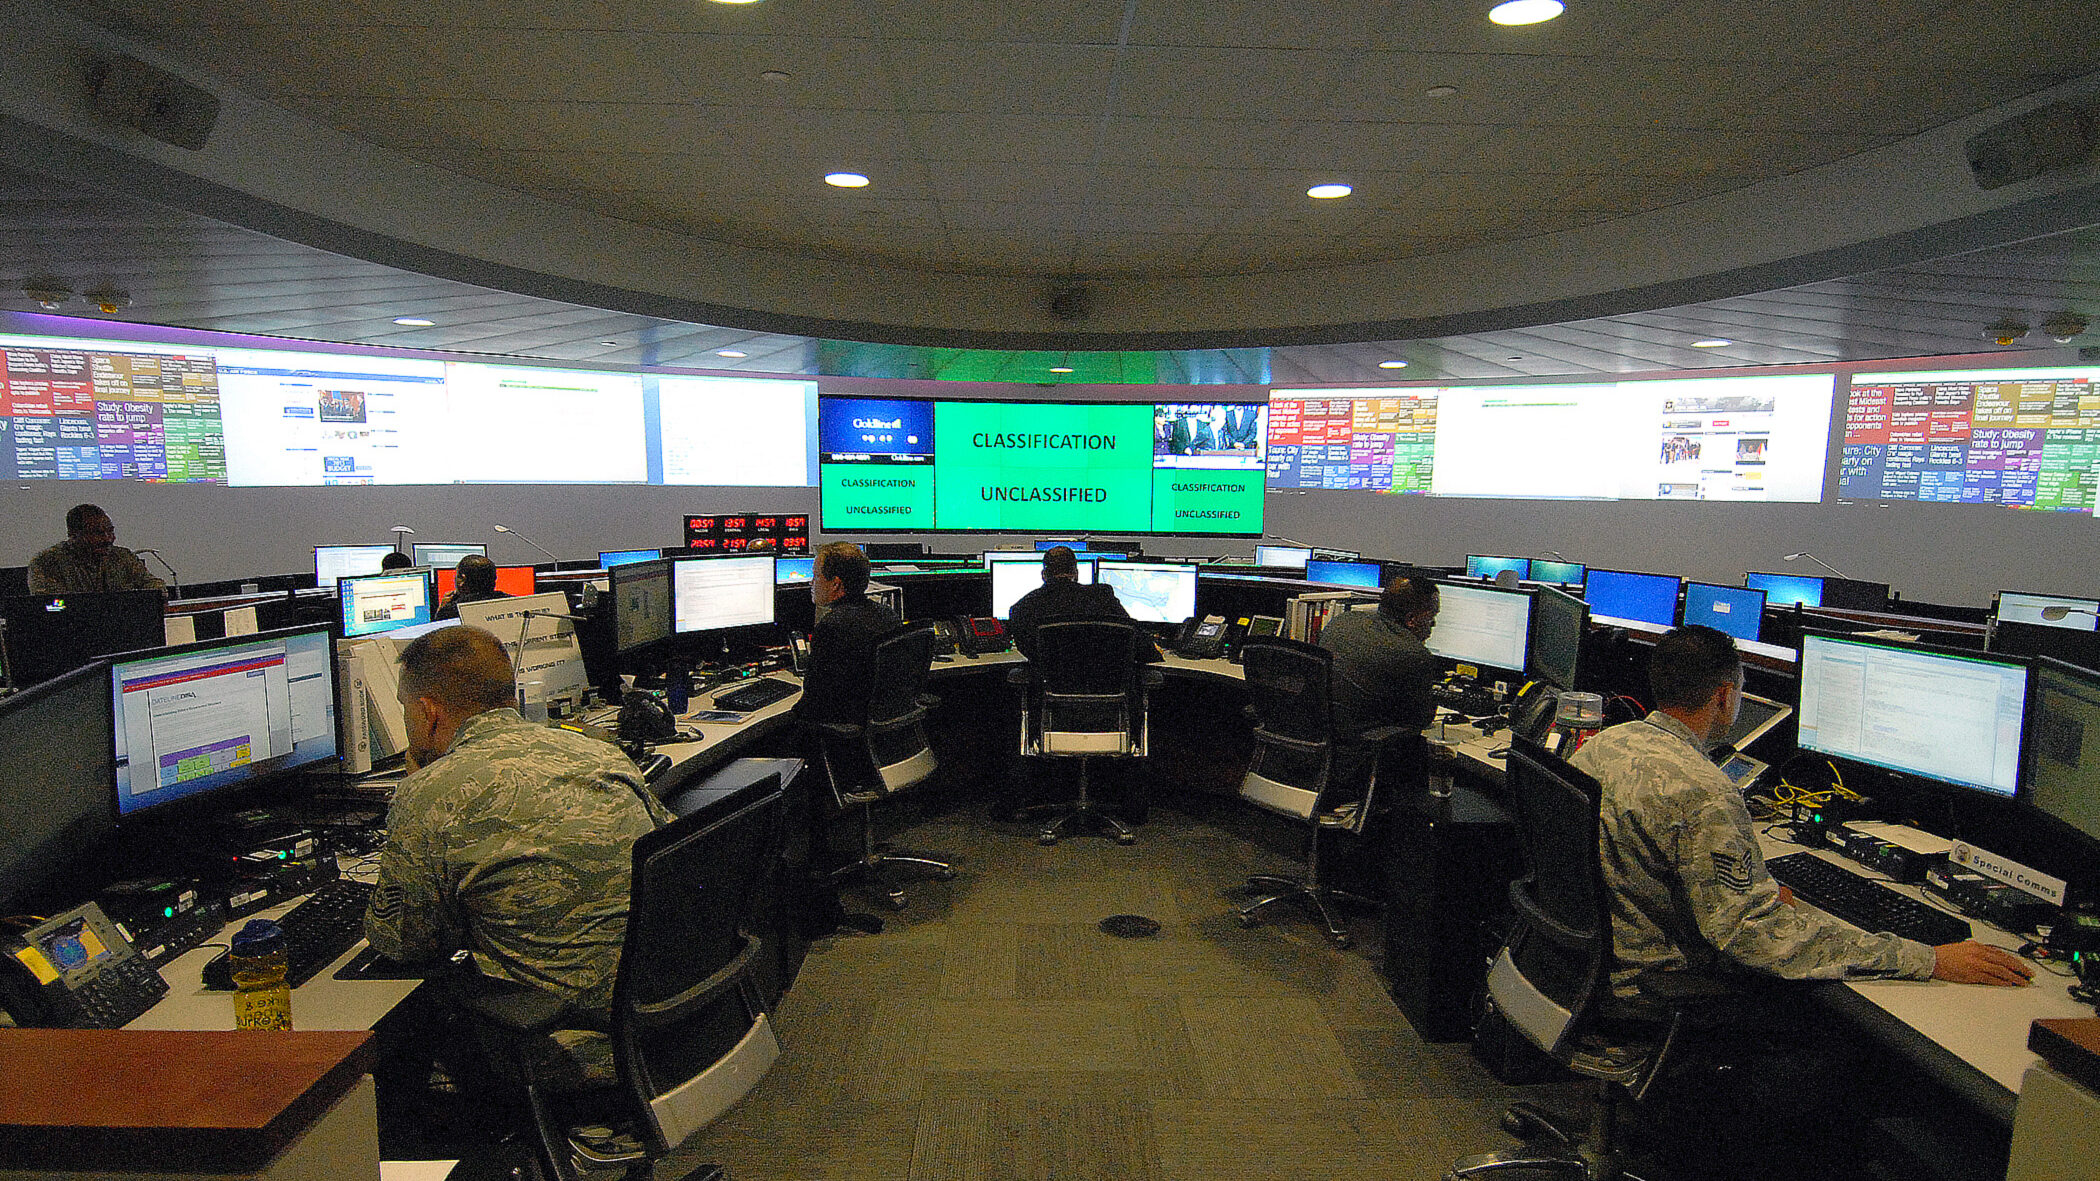 Several people in uniform sit in a room with many computers.